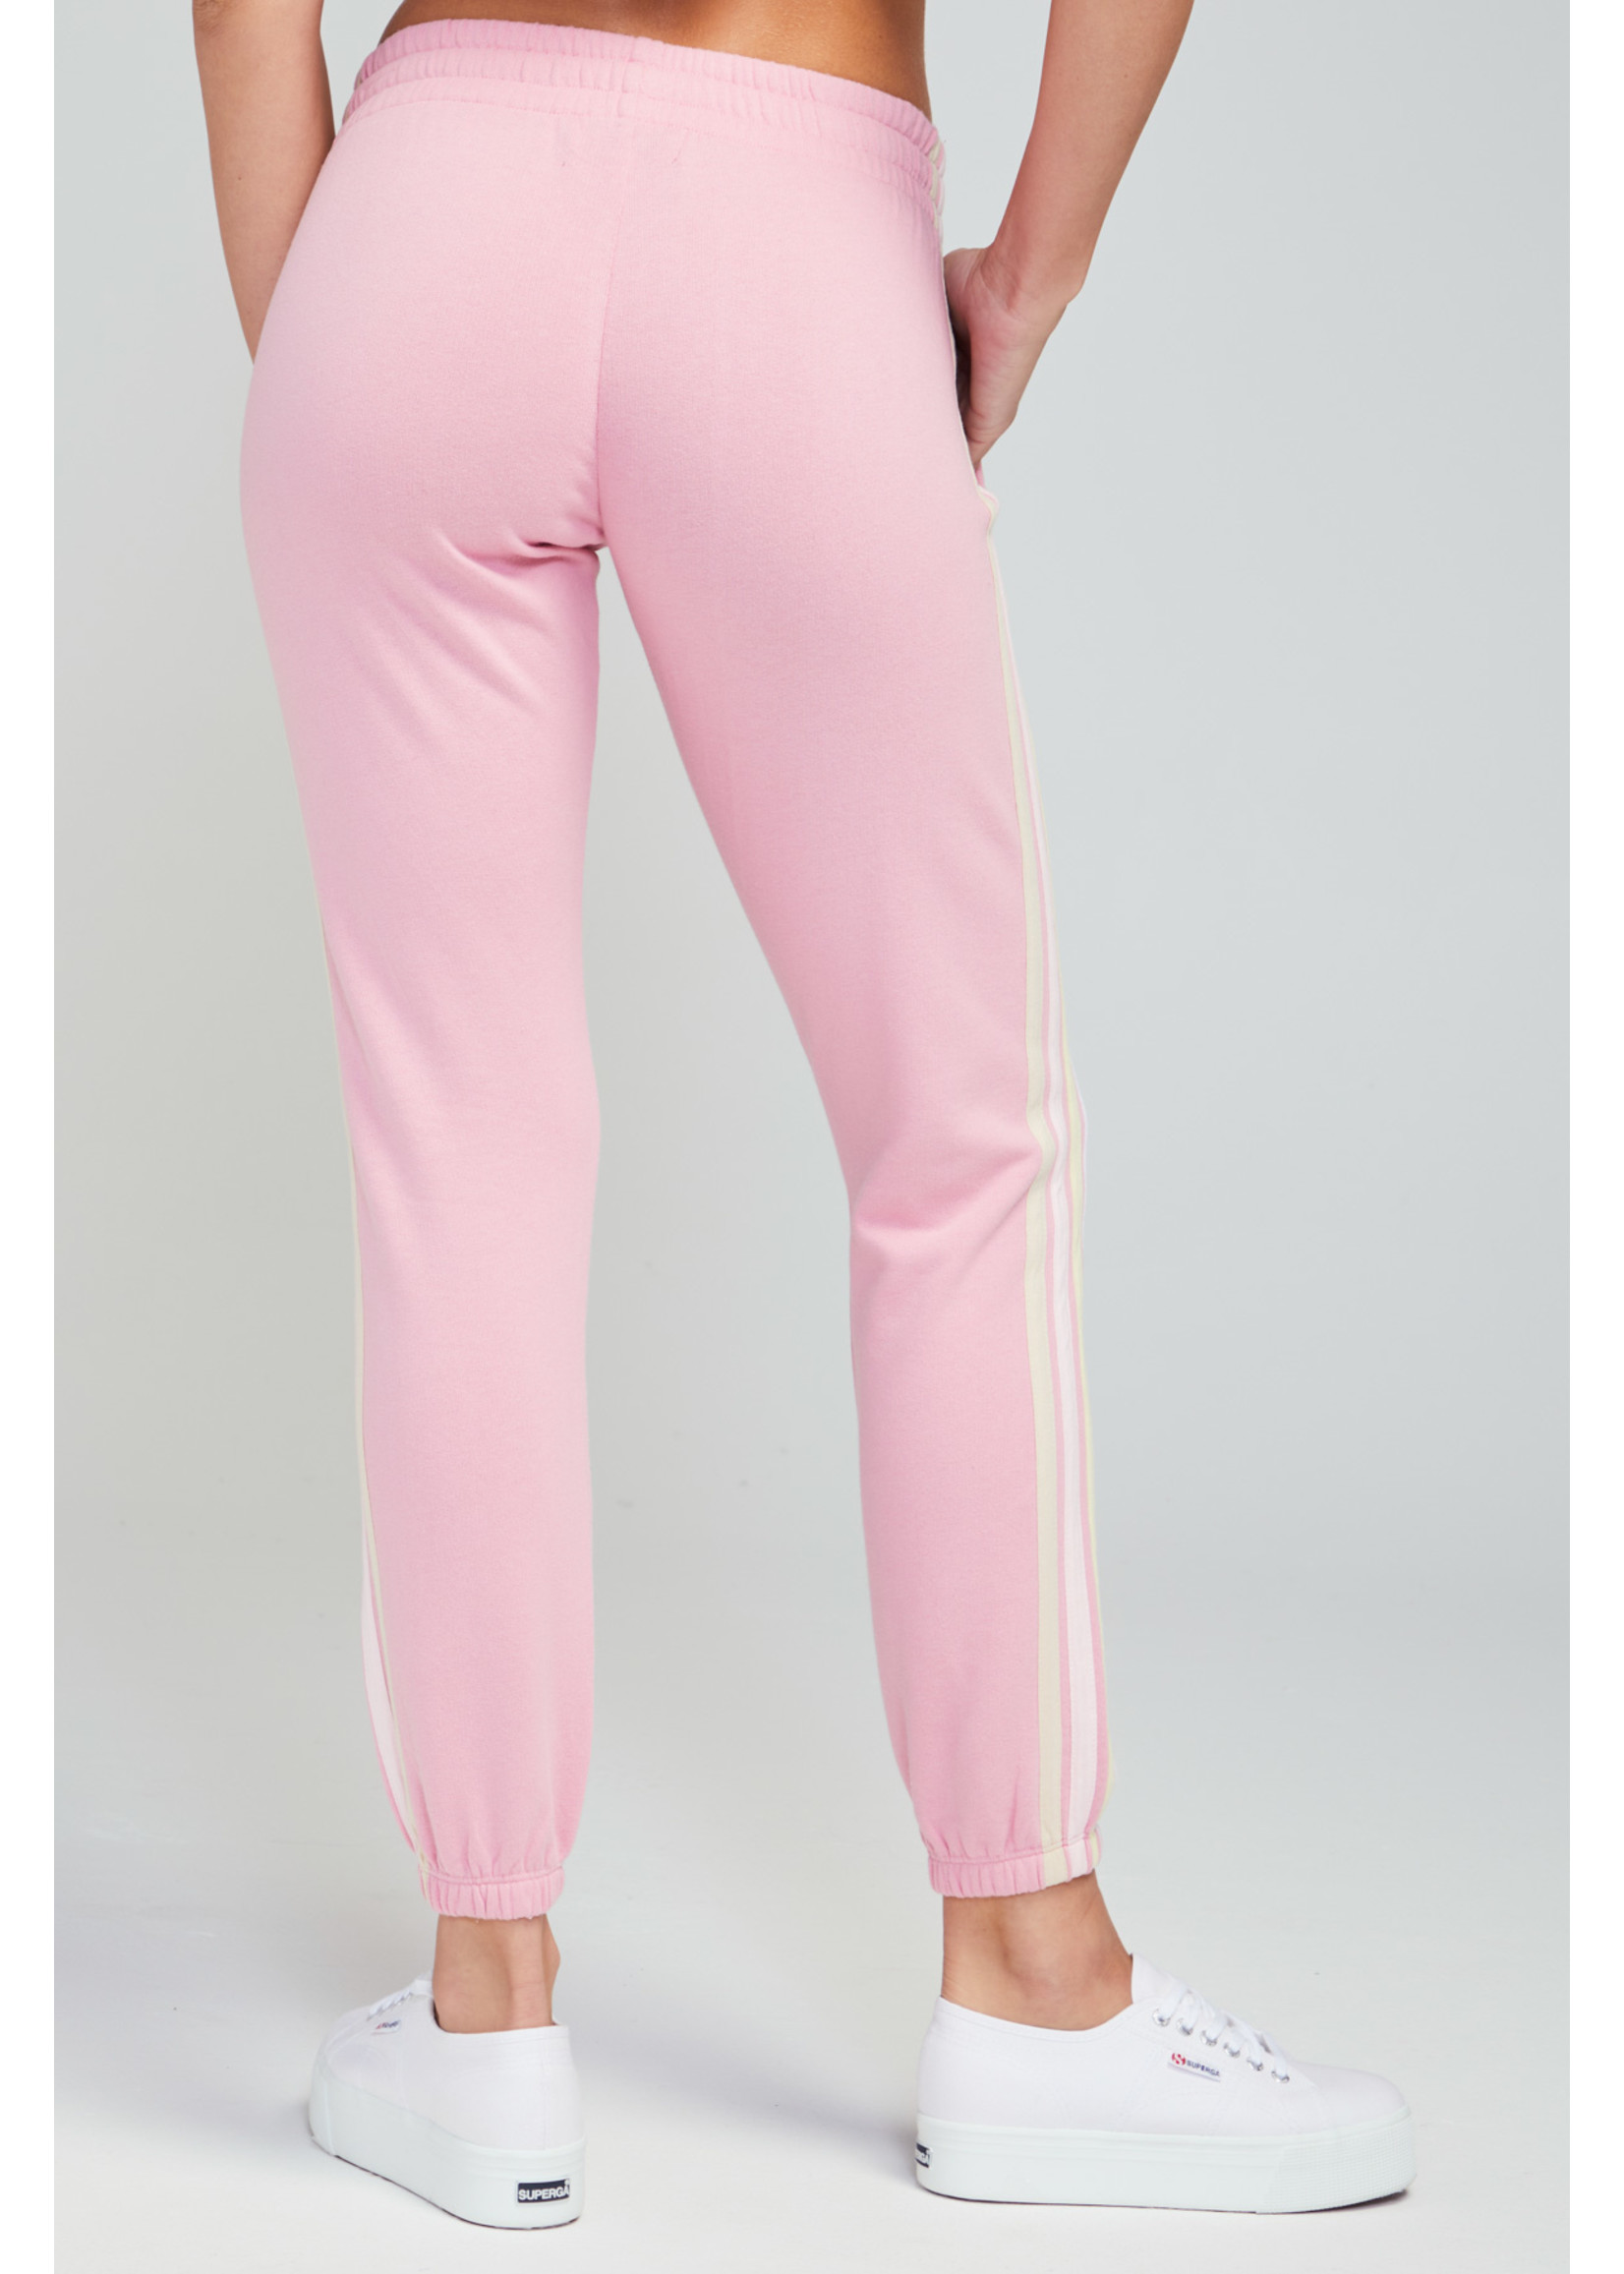 Homestead Stripes Joggers Pink